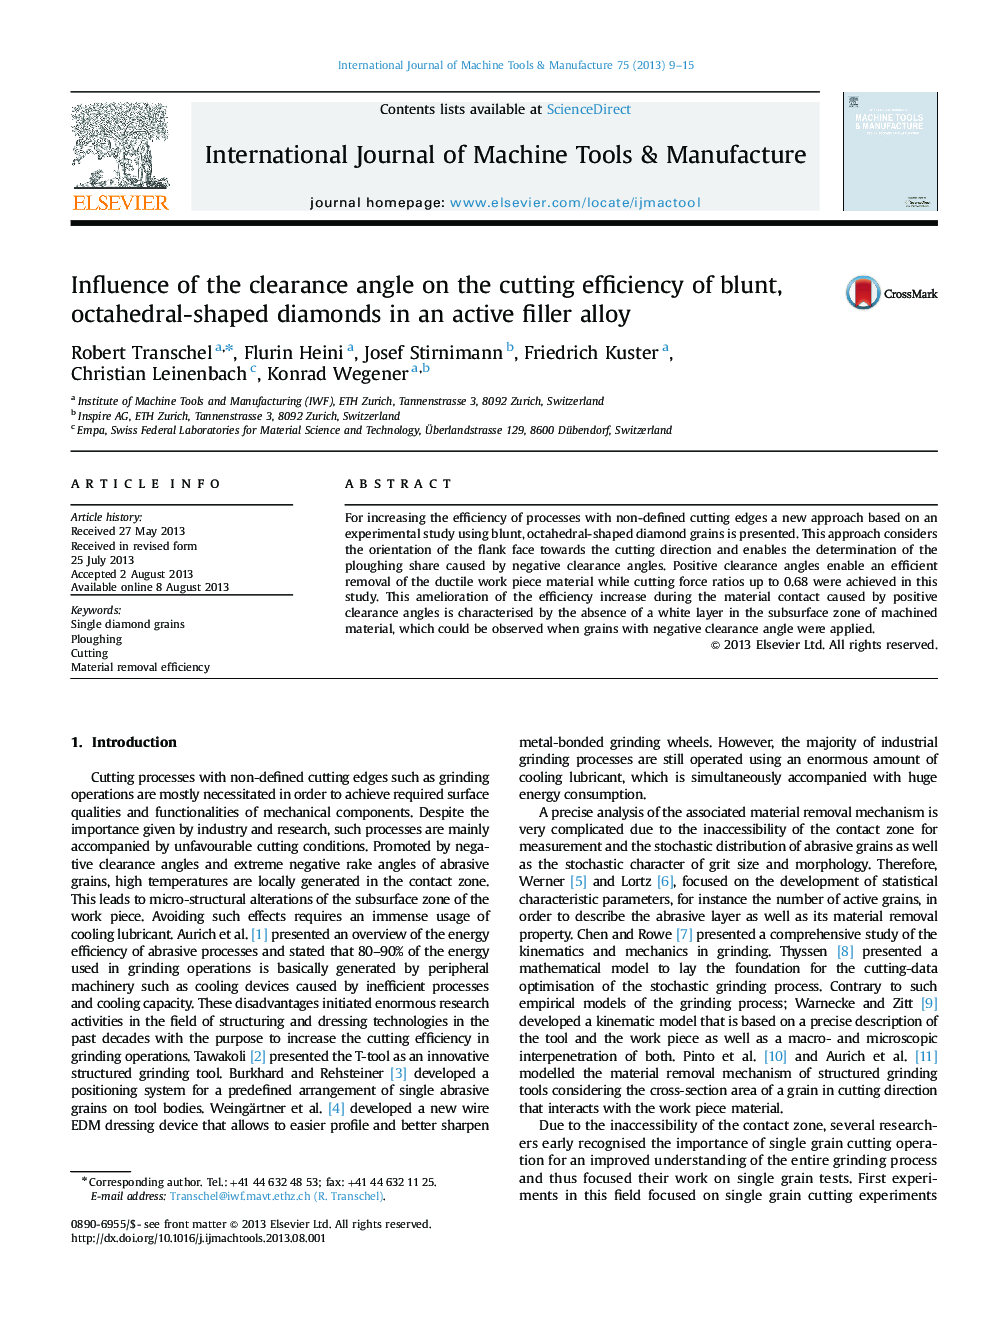 Influence of the clearance angle on the cutting efficiency of blunt, octahedral-shaped diamonds in an active filler alloy